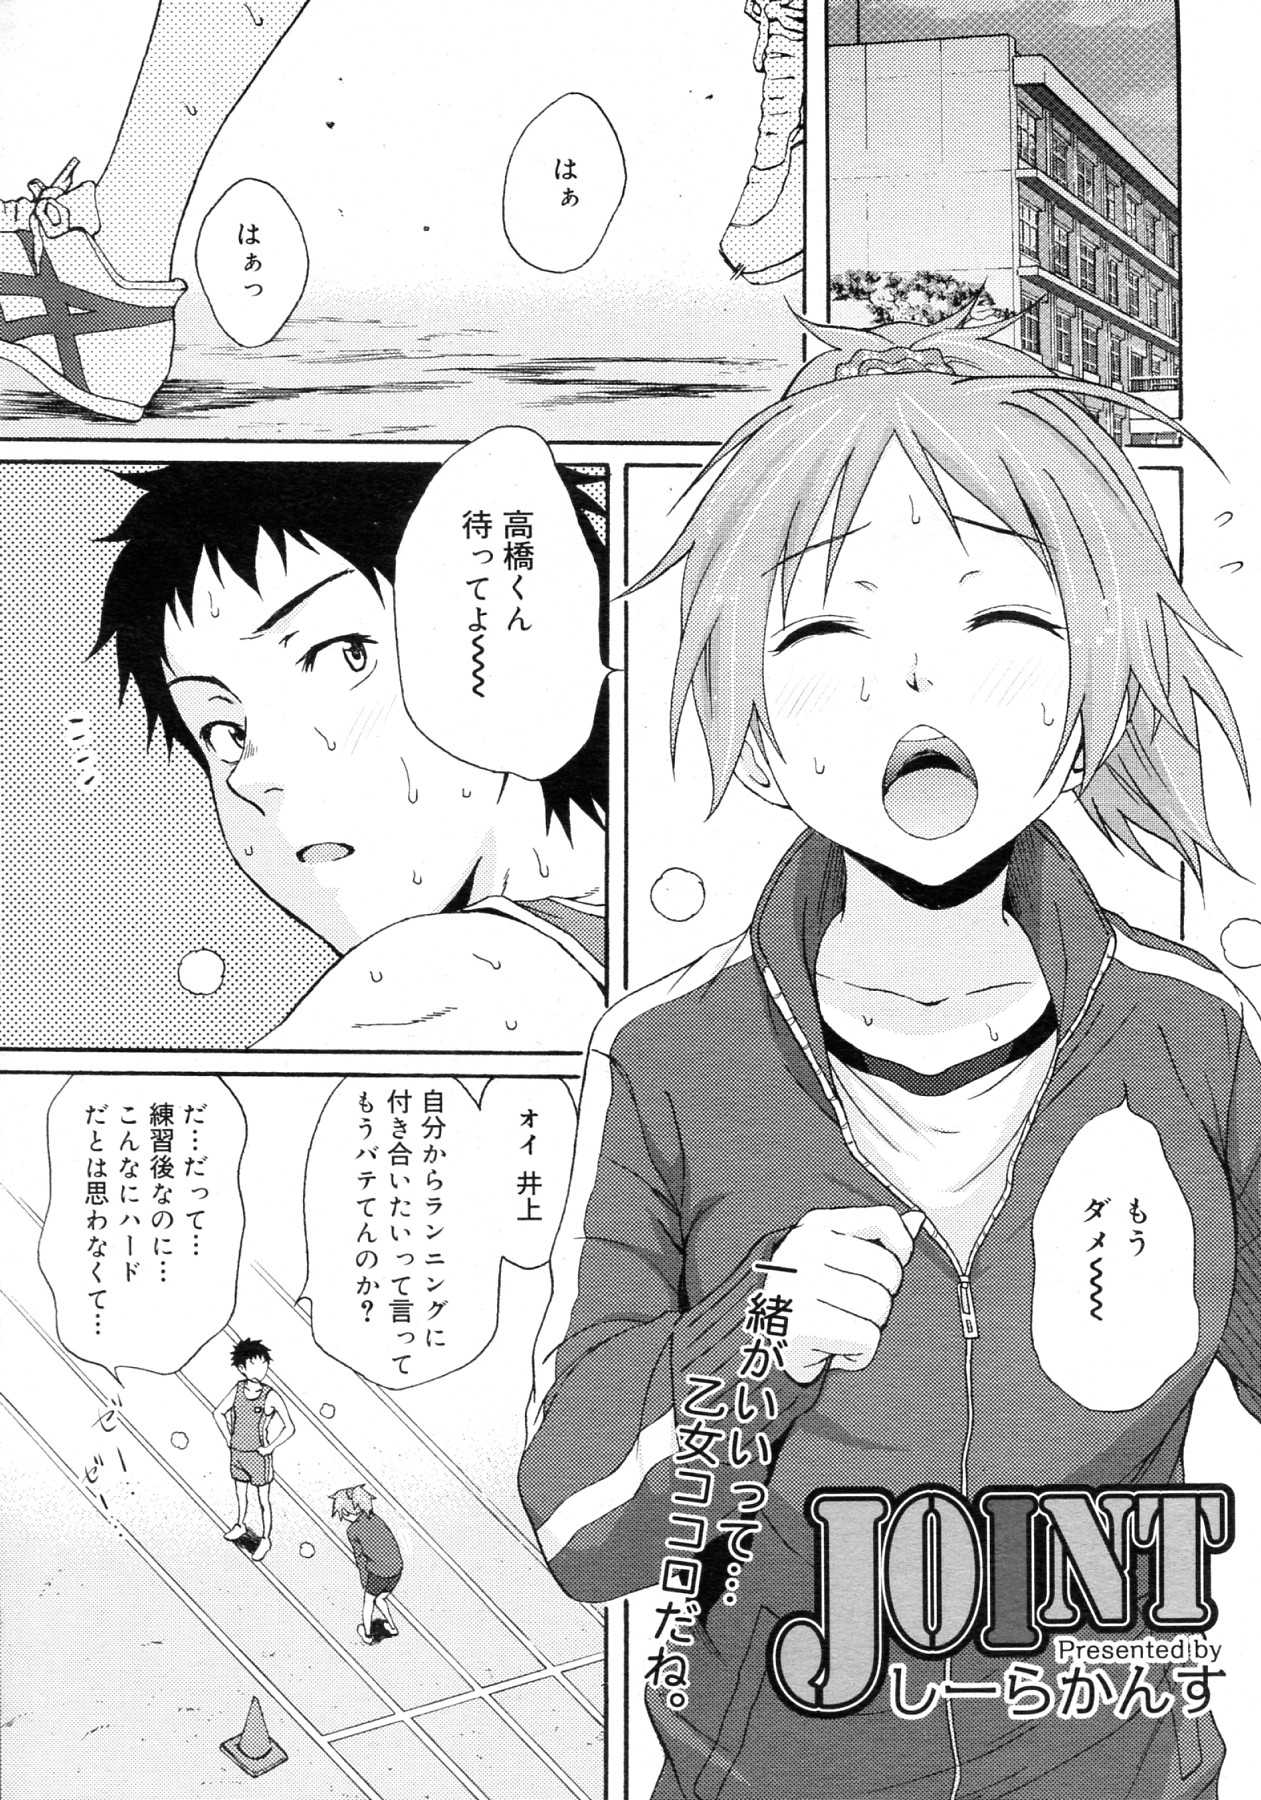 [Coelacanth] JOINT (COMIC Megamilk Vol.14) [しーらかんす] JOINT (コミックメガミルク Vol.14)